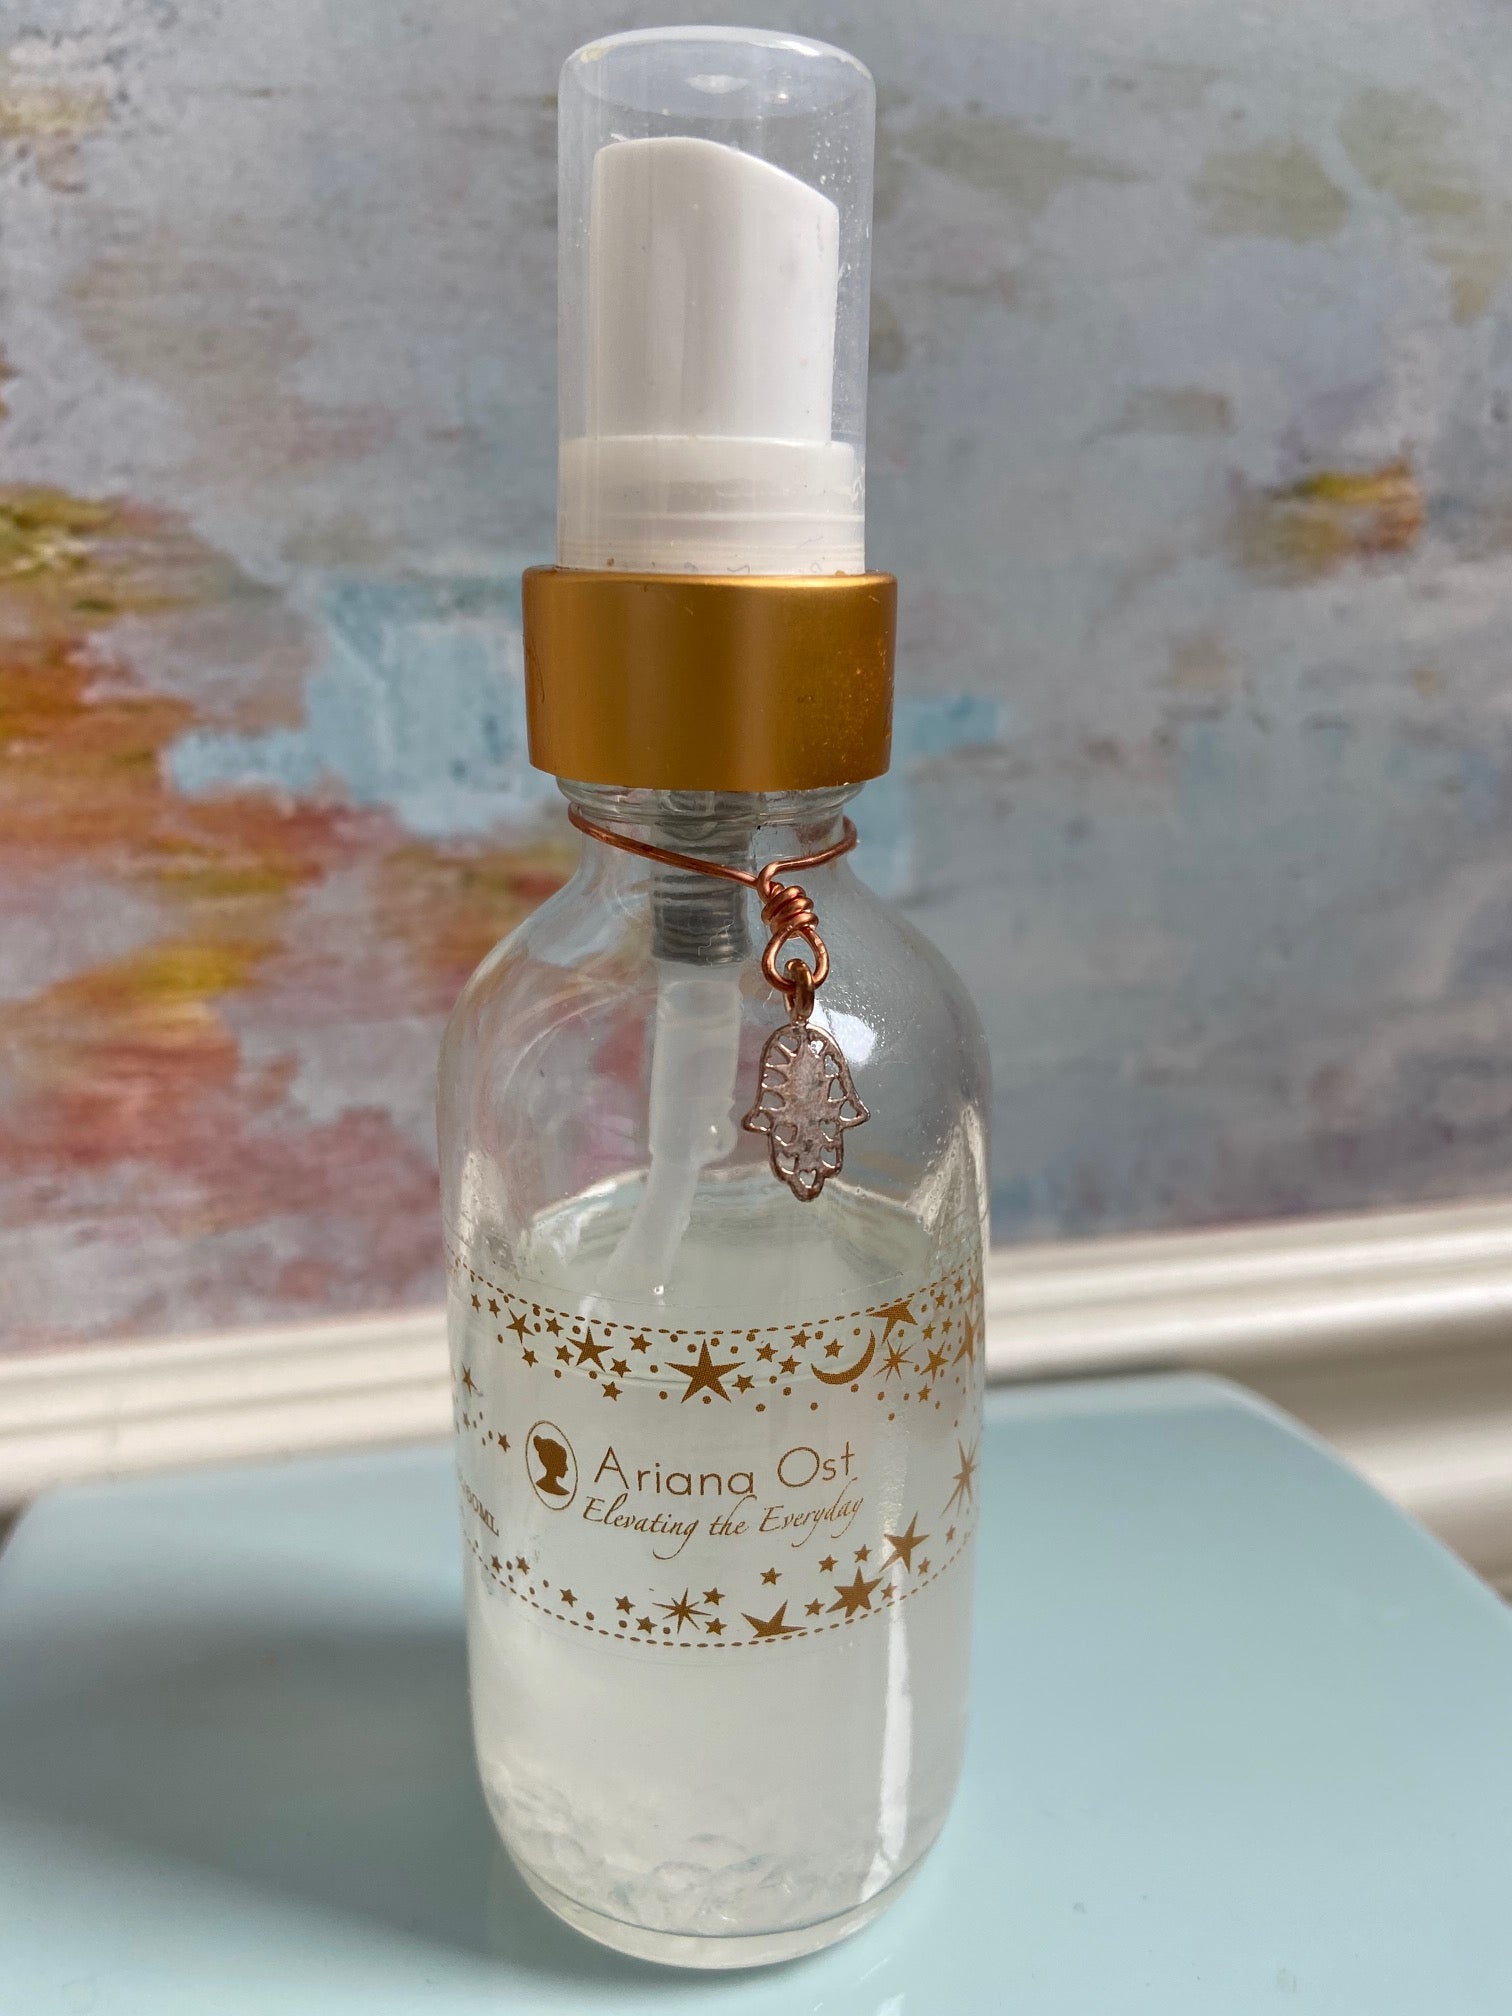 Crystal Infused Hand Sanitizer with Copper Hamsa Charm - Ariana Ost